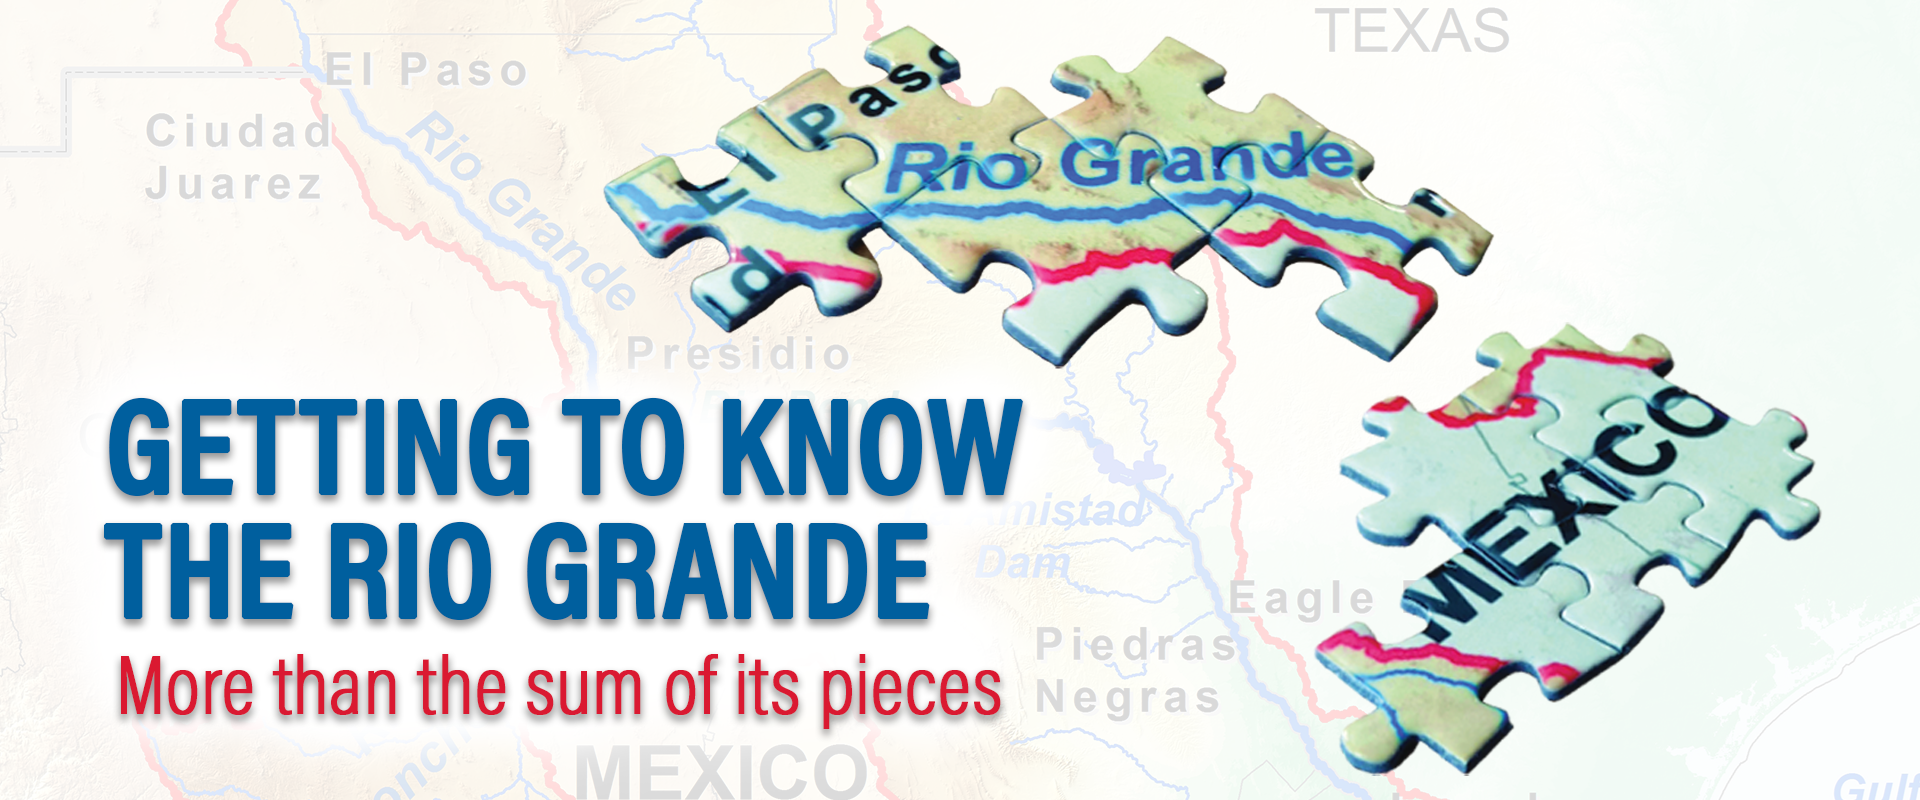 Getting to Know the Rio Grande